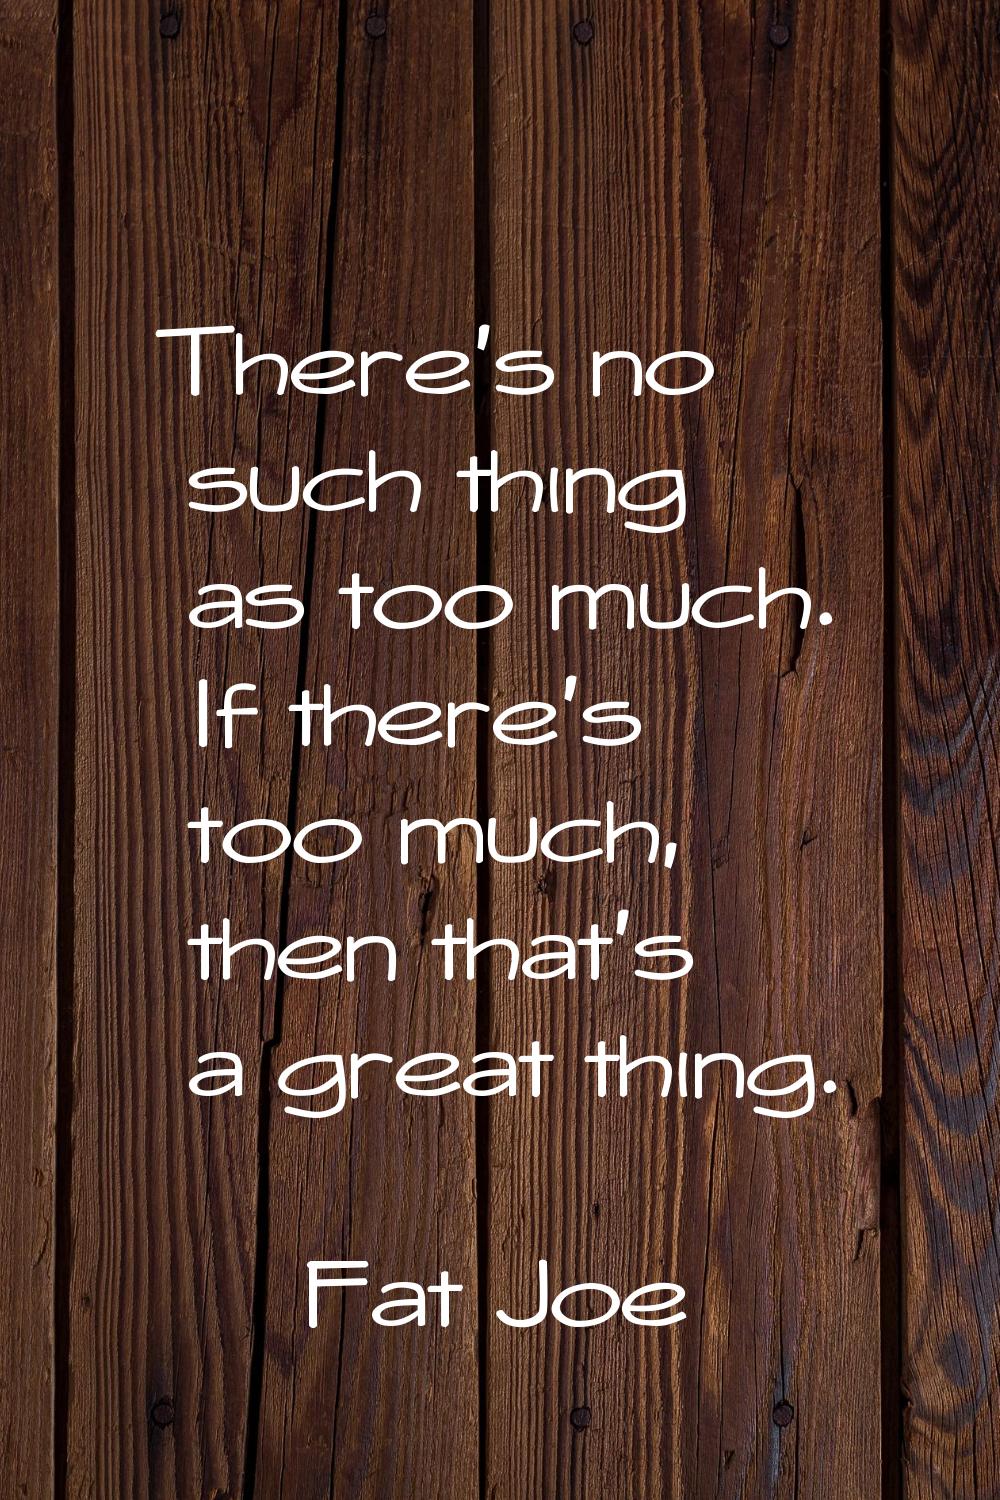 There's no such thing as too much. If there's too much, then that's a great thing.